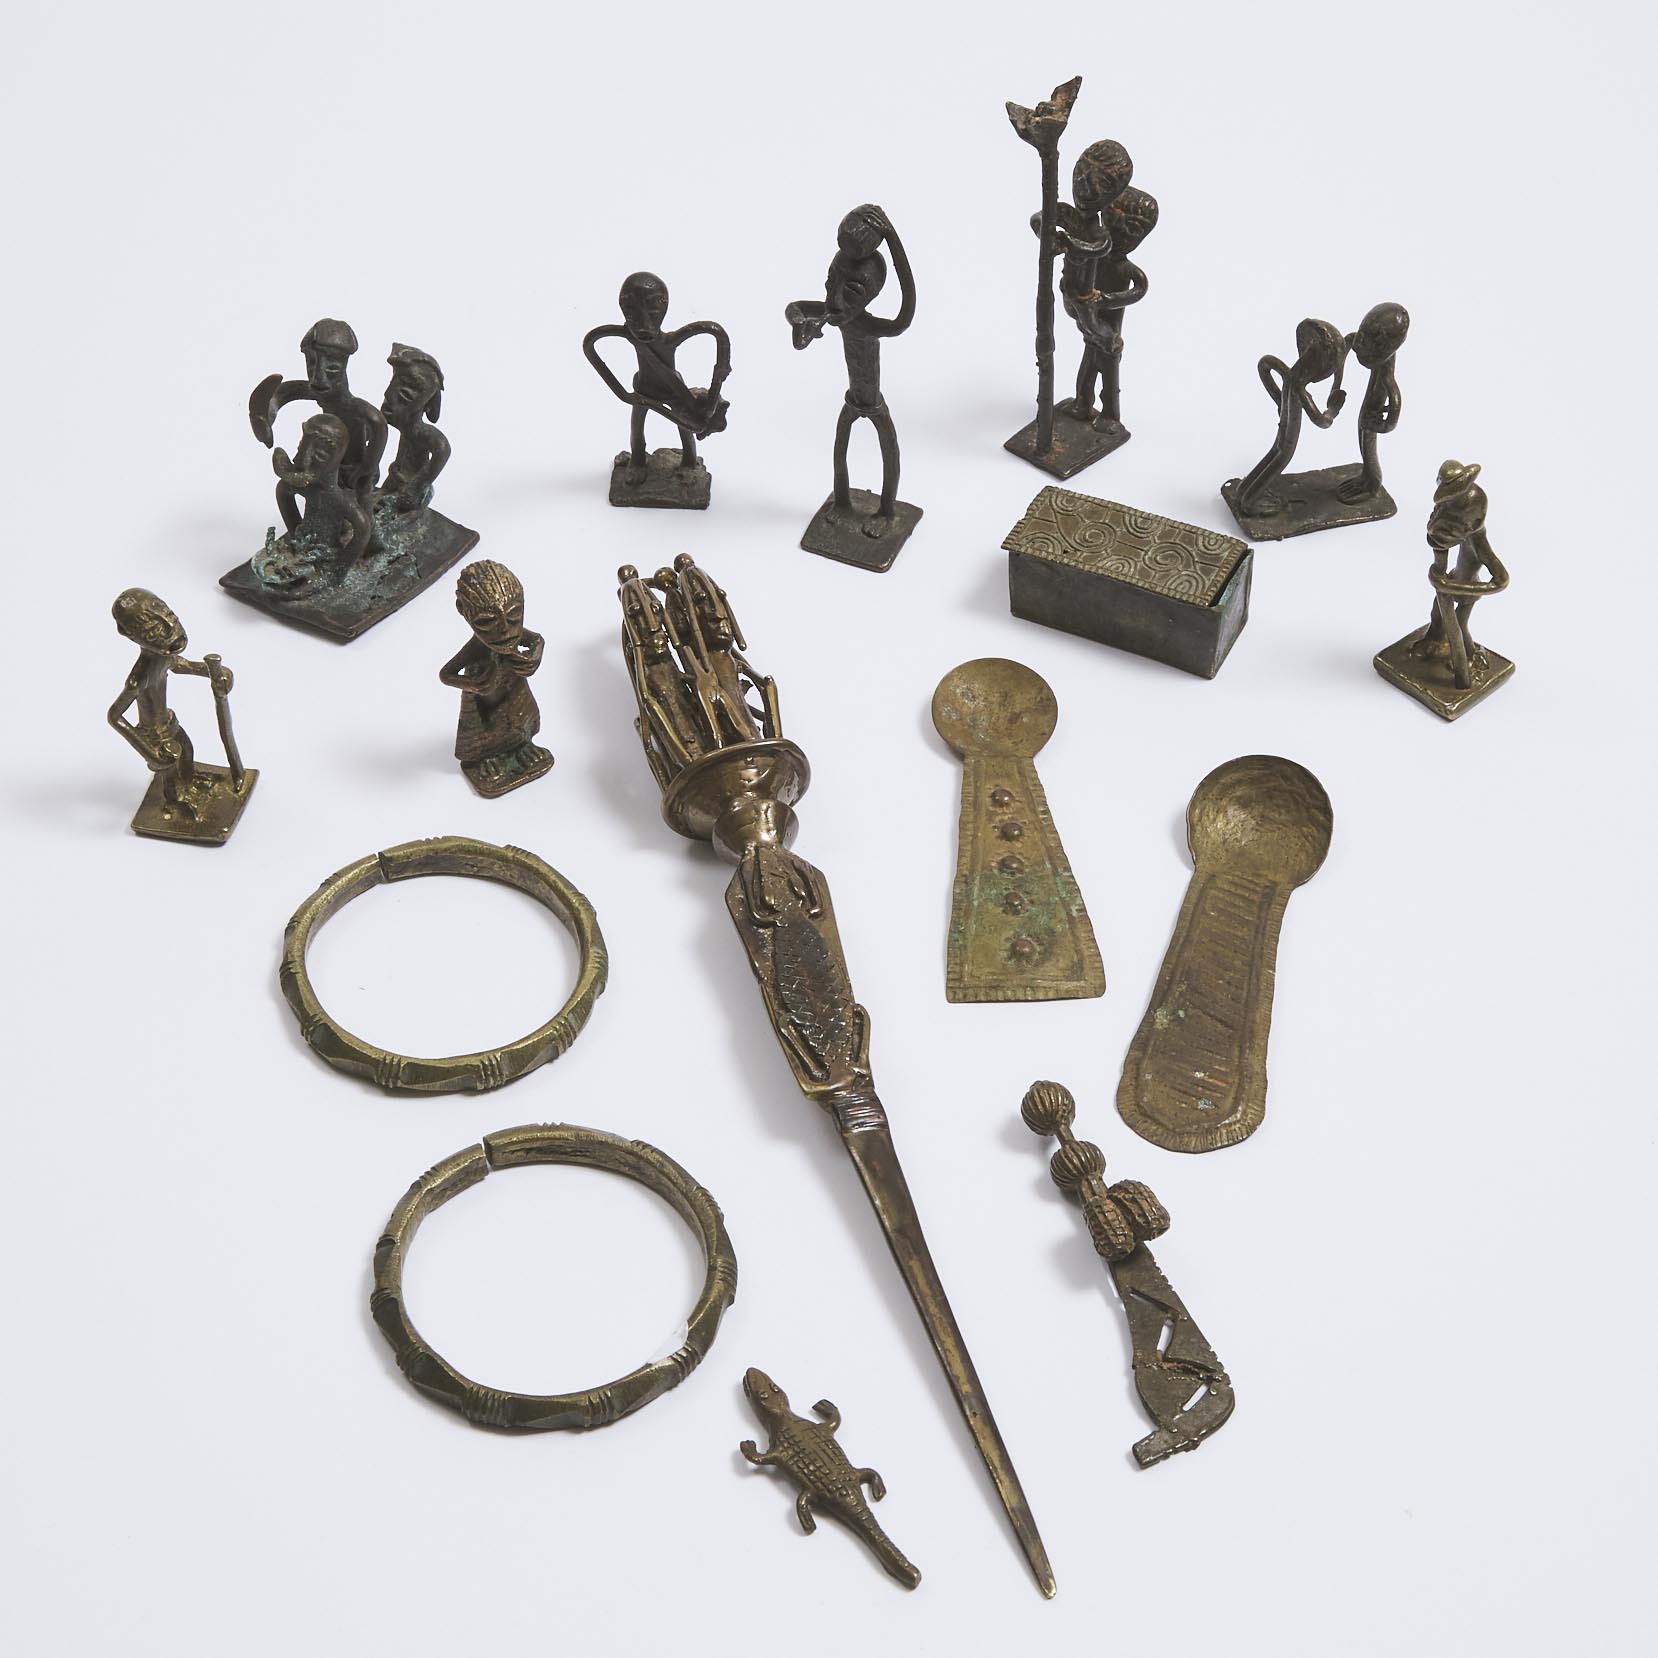 A group of 13 Akan Brass Artifacts including ten figural goldweights, two gold dust spoons and box, two African bangles and a letter opener, 19th/20th century